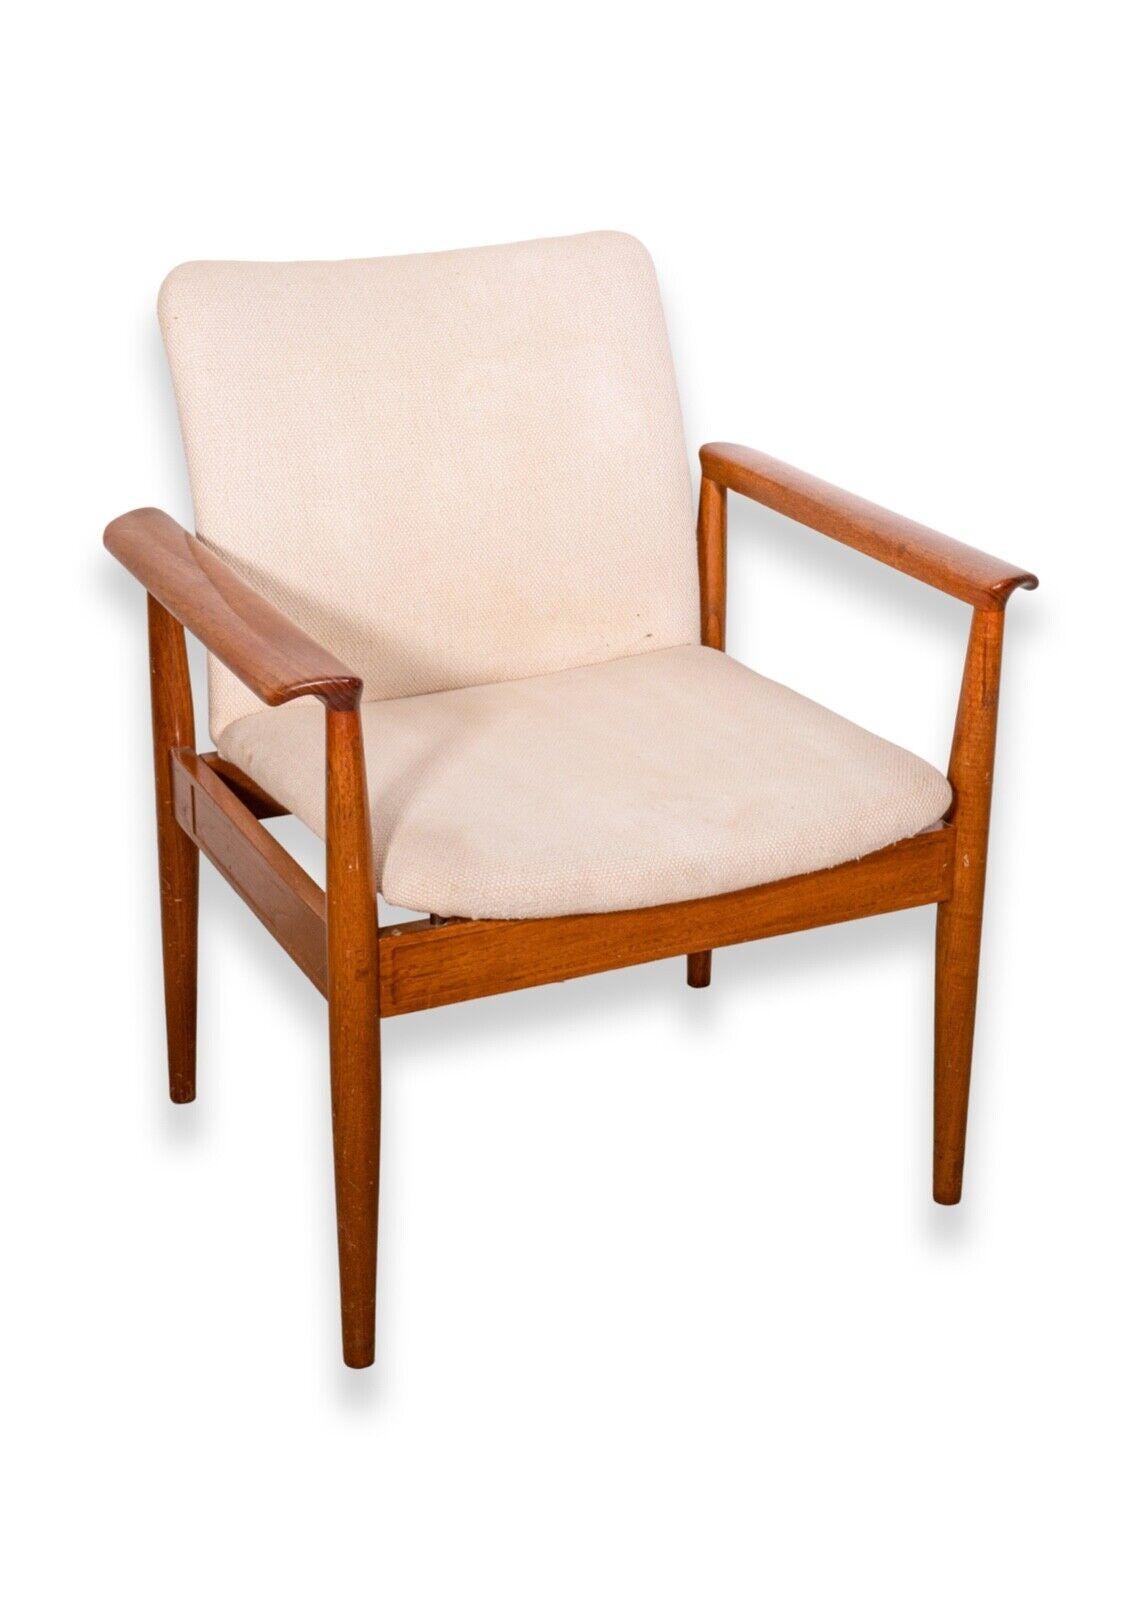 A sophisticated pair of modern armchairs designed by Finn Juhl for France & Son, Denmark. Known as the Diplomat Chair, Model 209. Produced in the 1960s. A sleek teak frame with neutral cream upholstery. Embossed maker's mark on rear stretcher. Finn